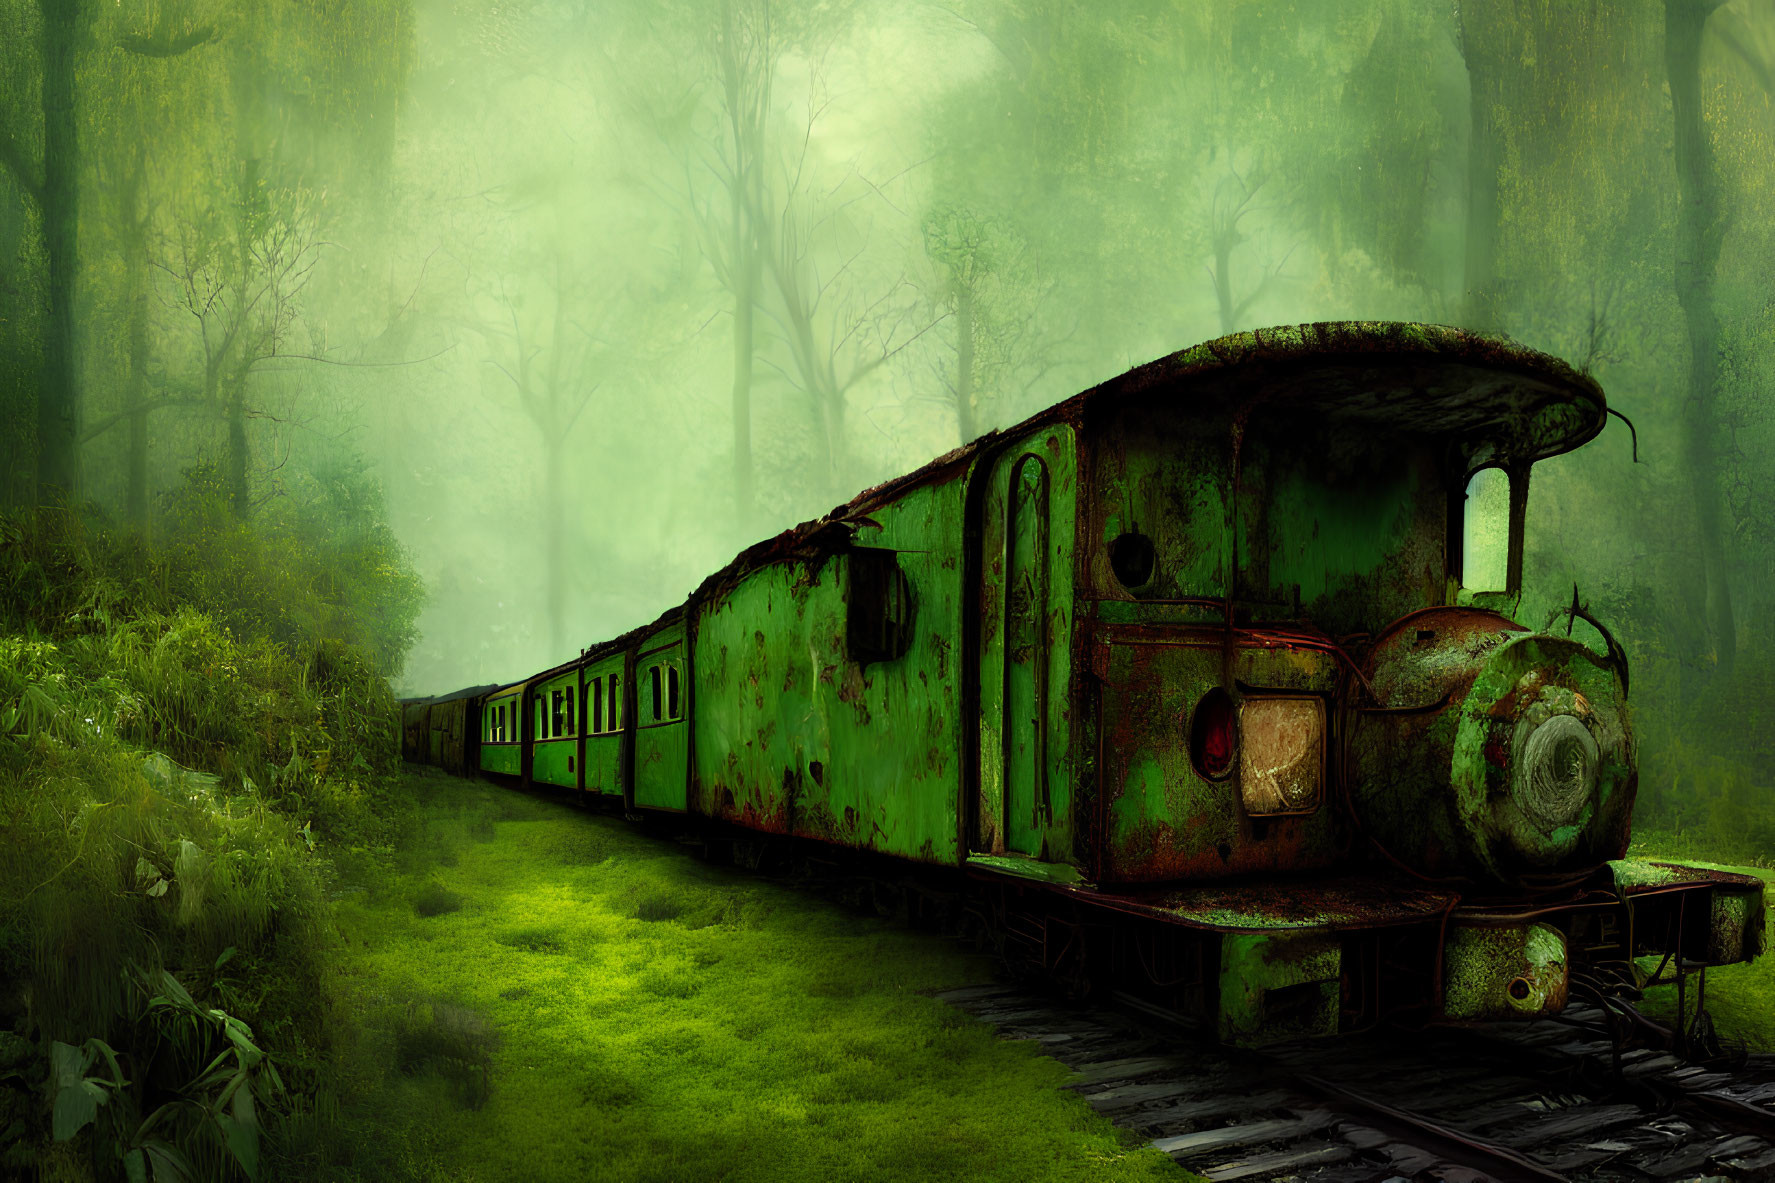 Abandoned moss-covered train in foggy forest